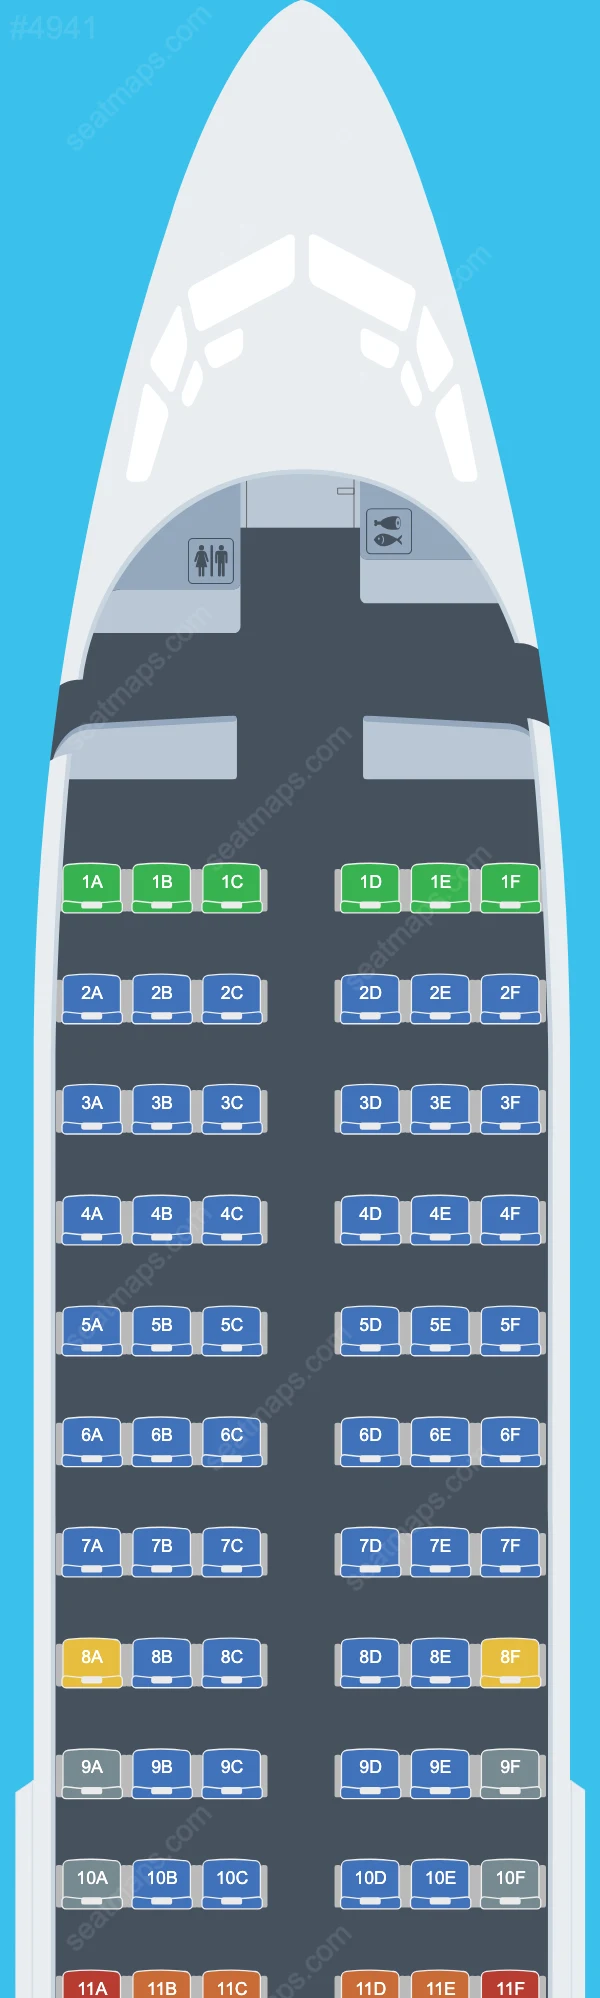 Alexandria Airlines Boeing 737 Seat Maps 737-300 V.2